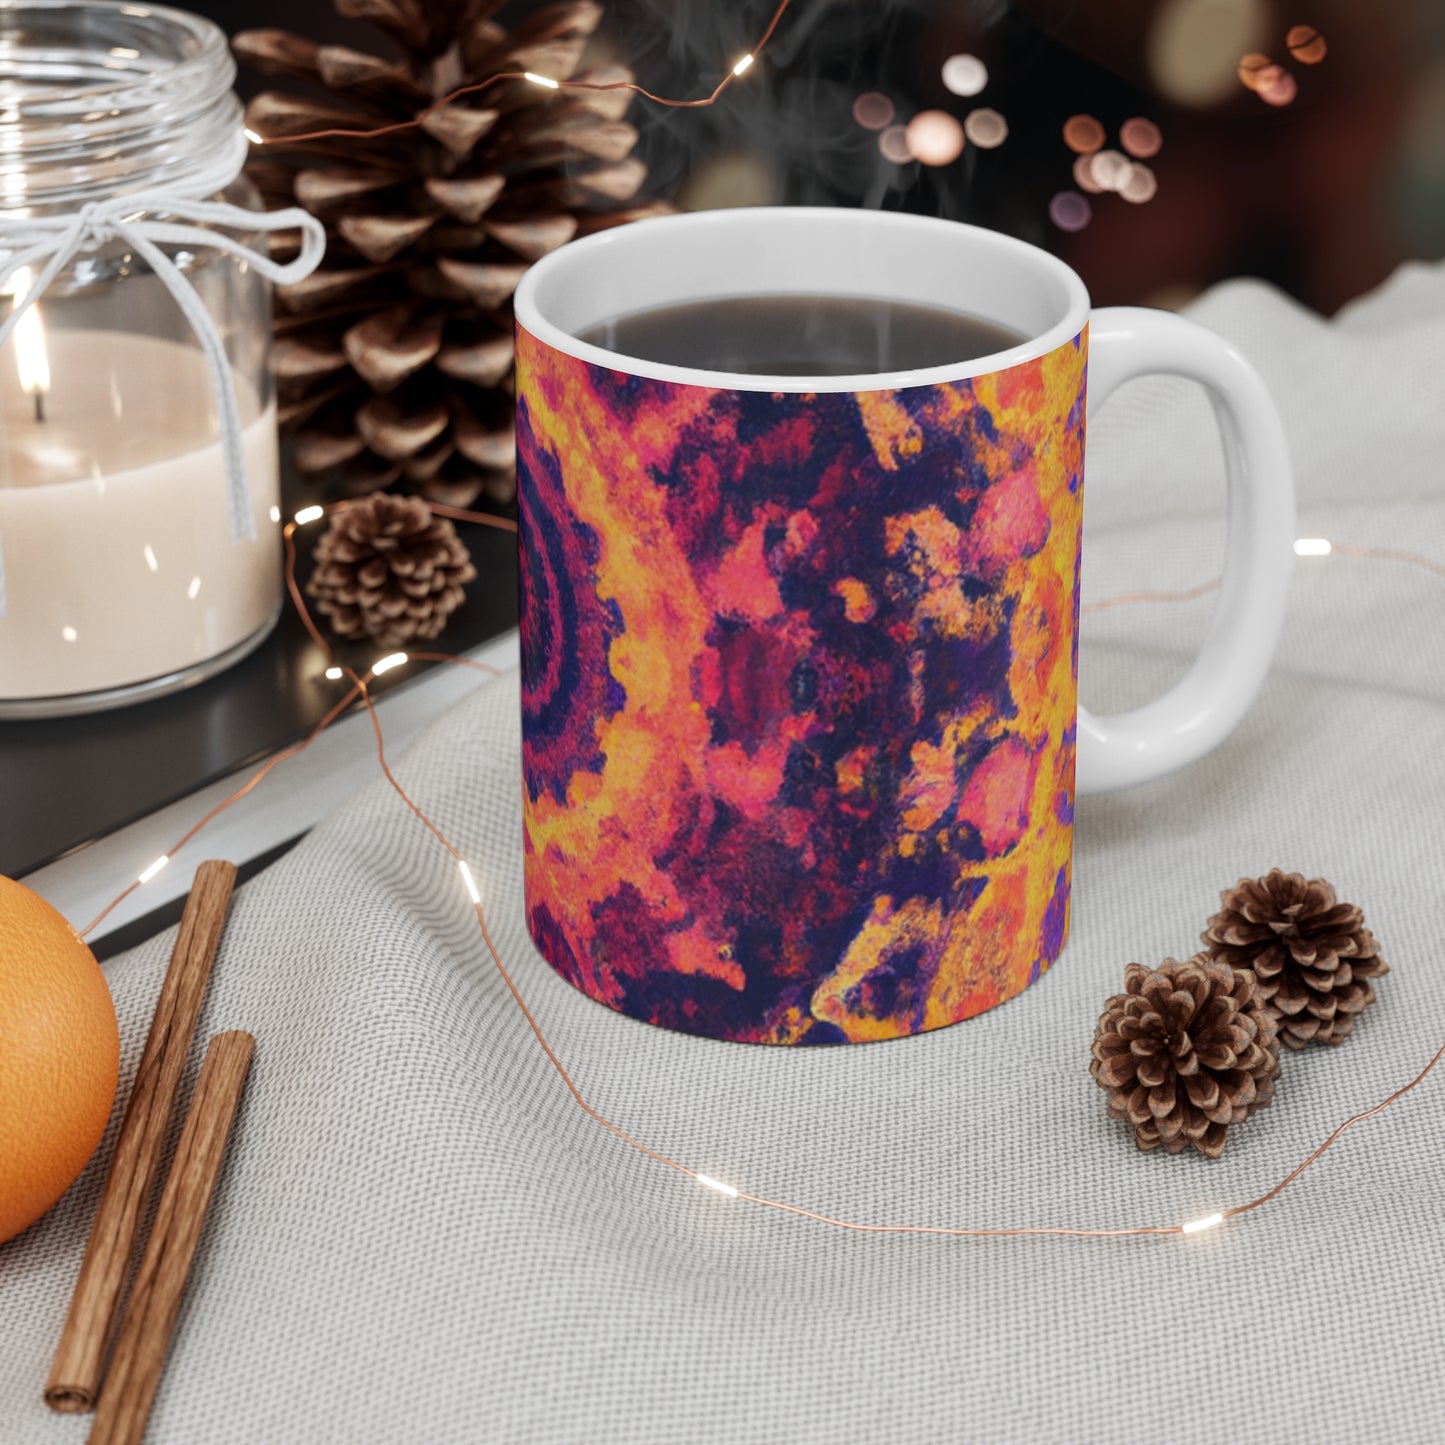 Fiona's Finest Coffee - Psychedelic Coffee Cup Mug 11 Ounce